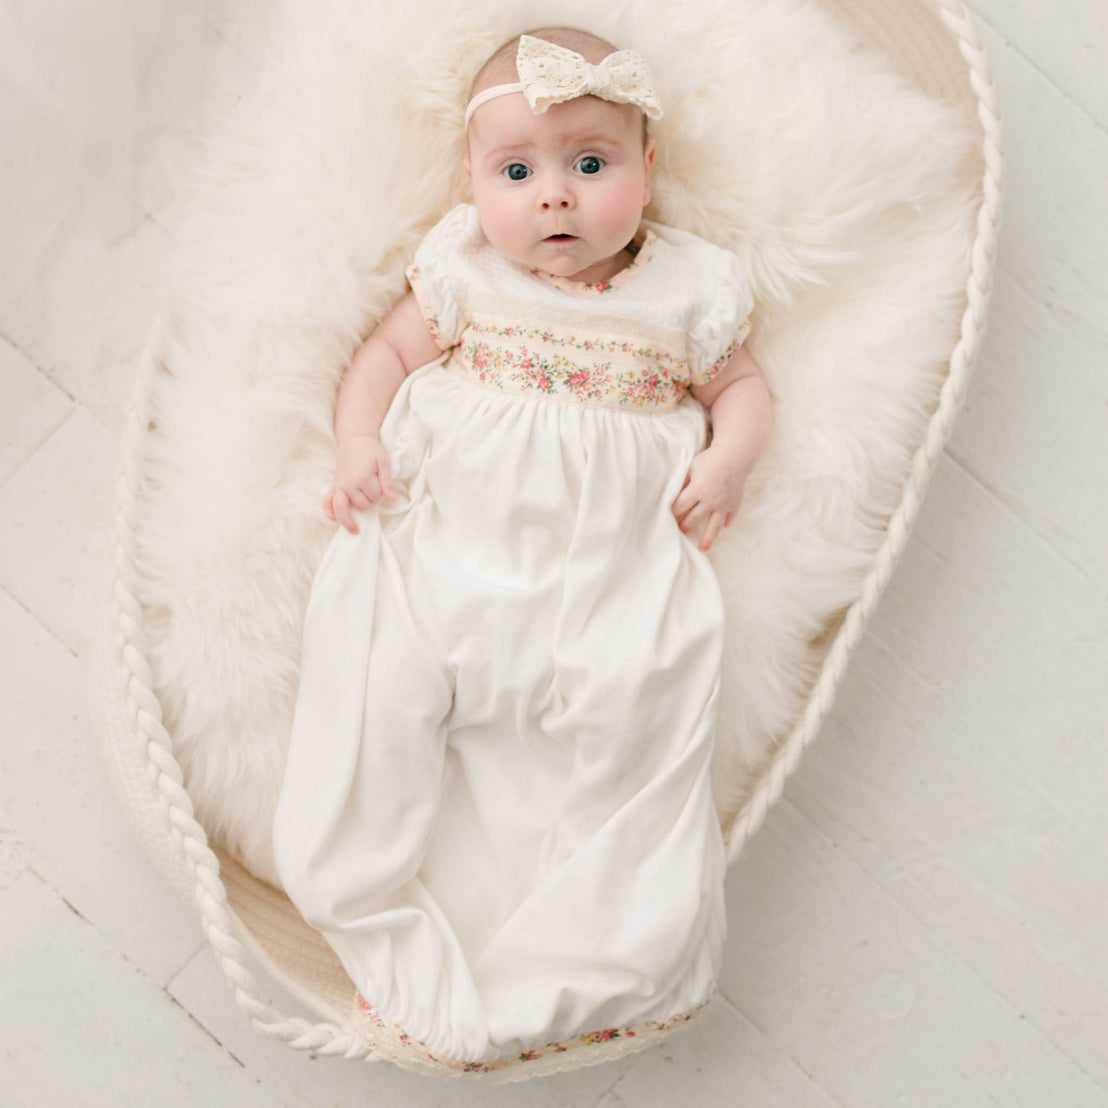 Newborn baby girl in a crib and wearing the "Blush" Eloise Layette Gown. She is also wearing the matching Eloise Bow Headband.